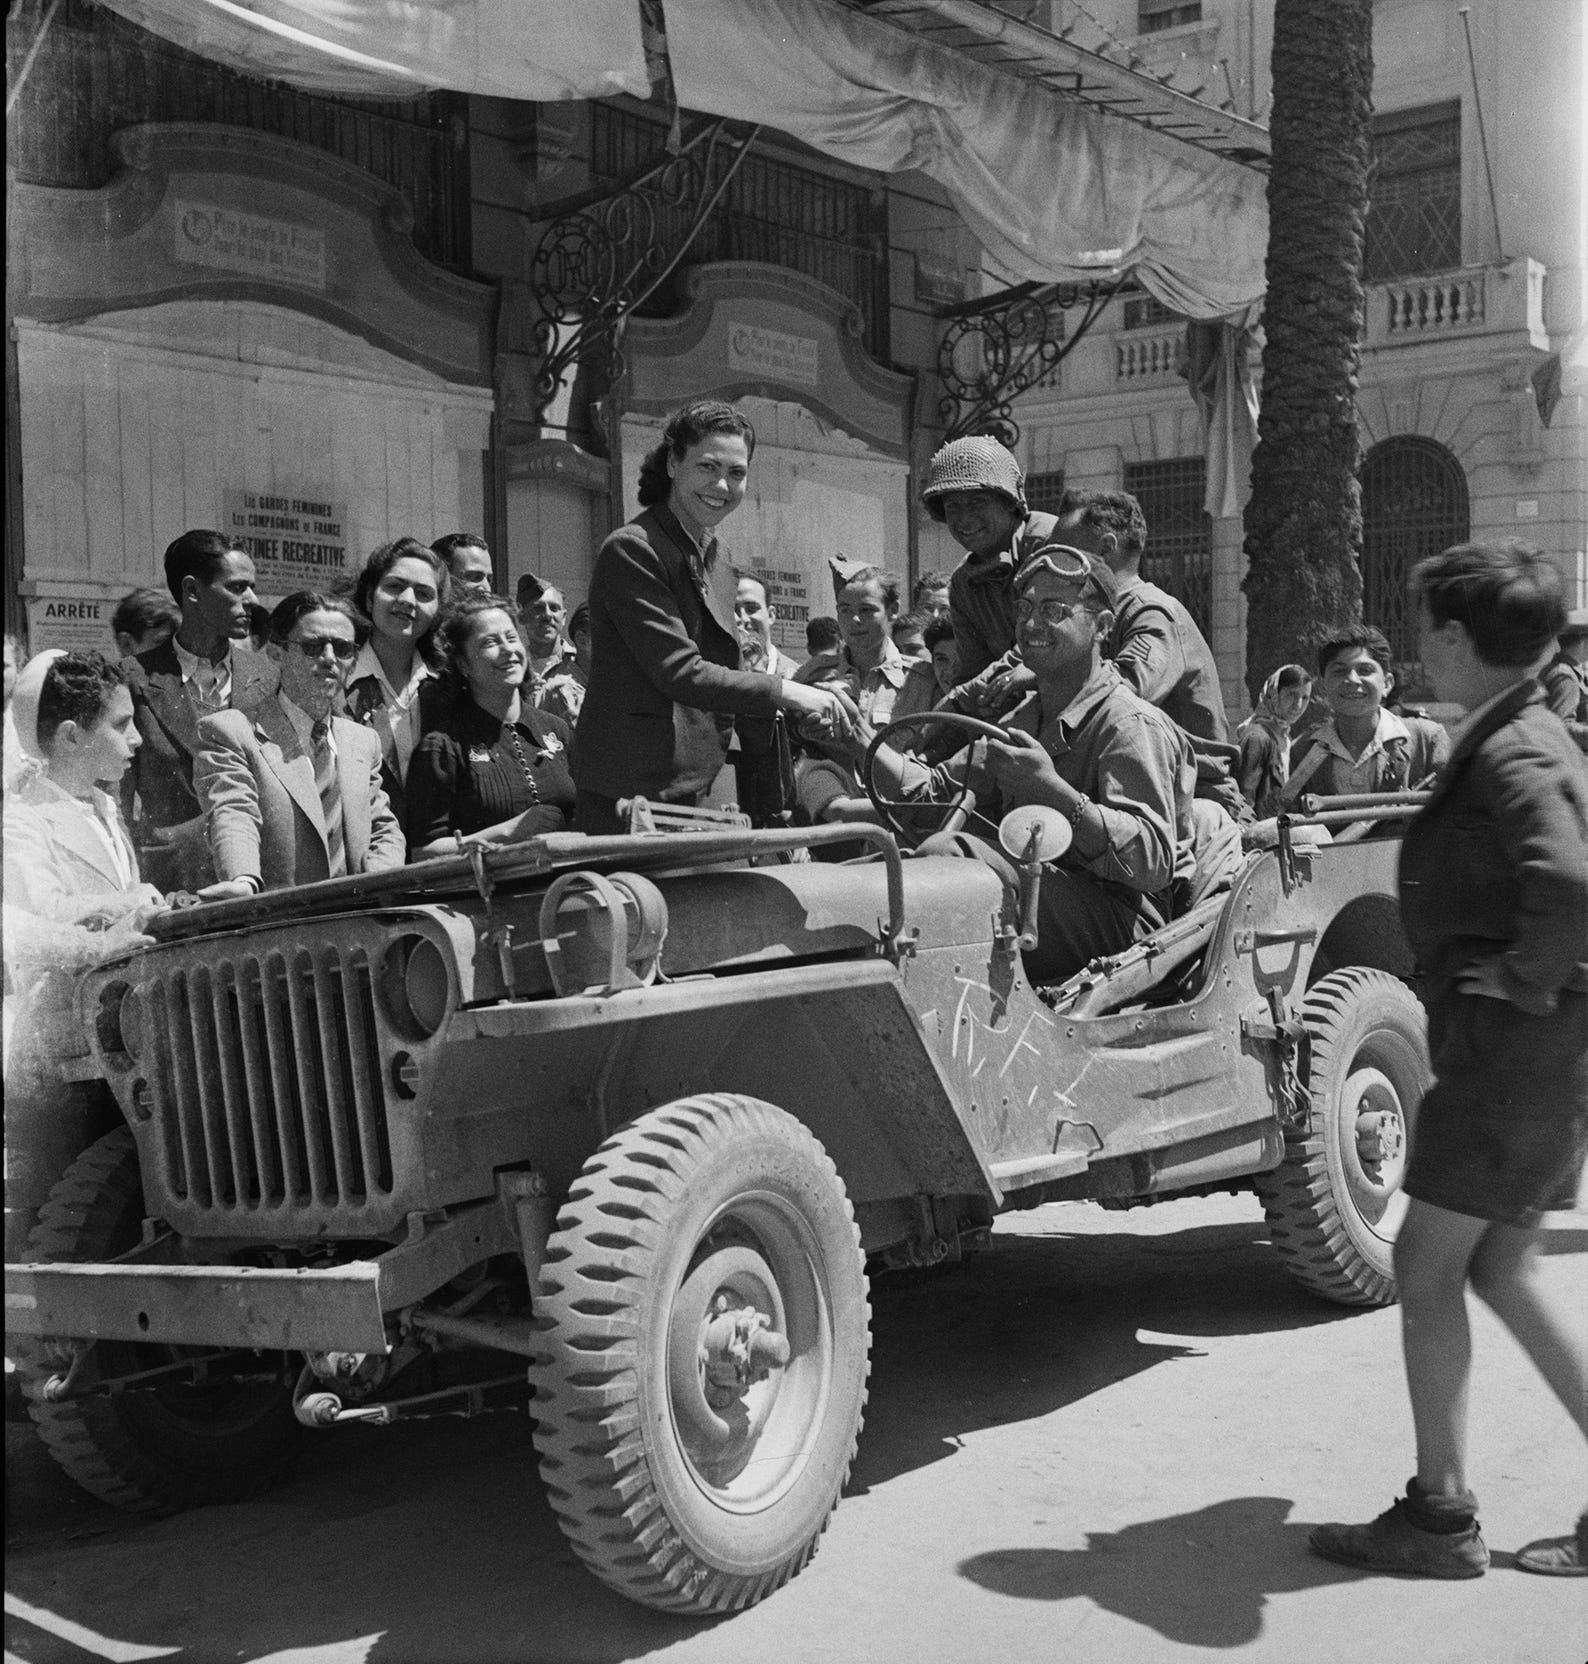 Girls climb on the Jeeps to greet American troops in the streets of Tunis in 1943.